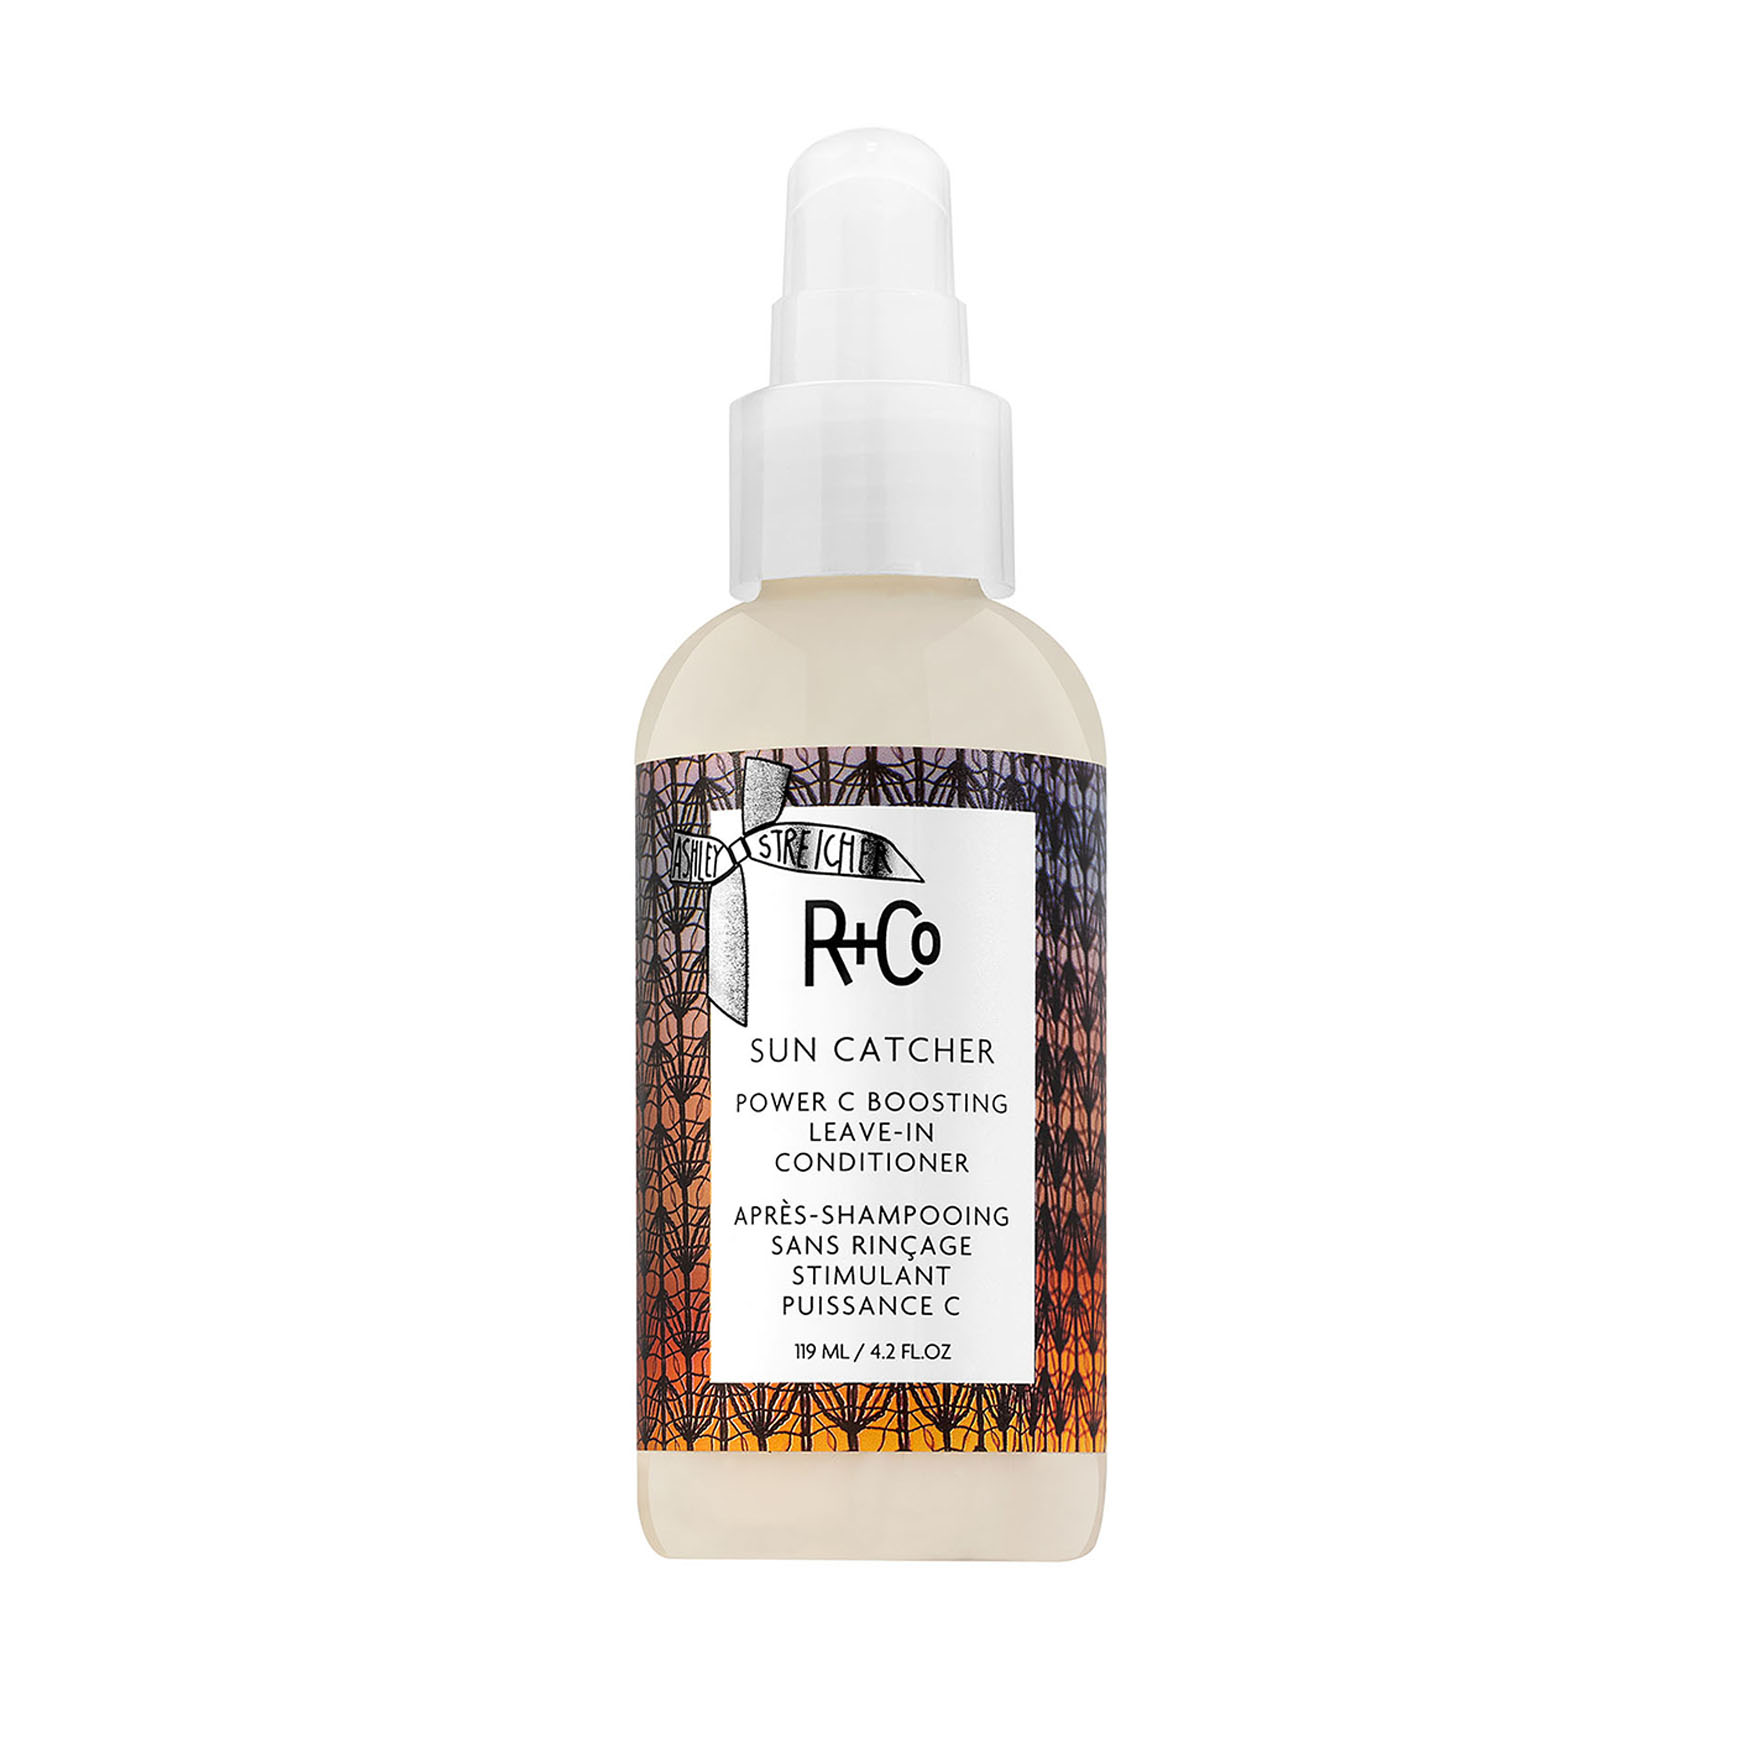 R+Co Sun Catcher Power C Boosting Leave-In Conditioner | Space NK